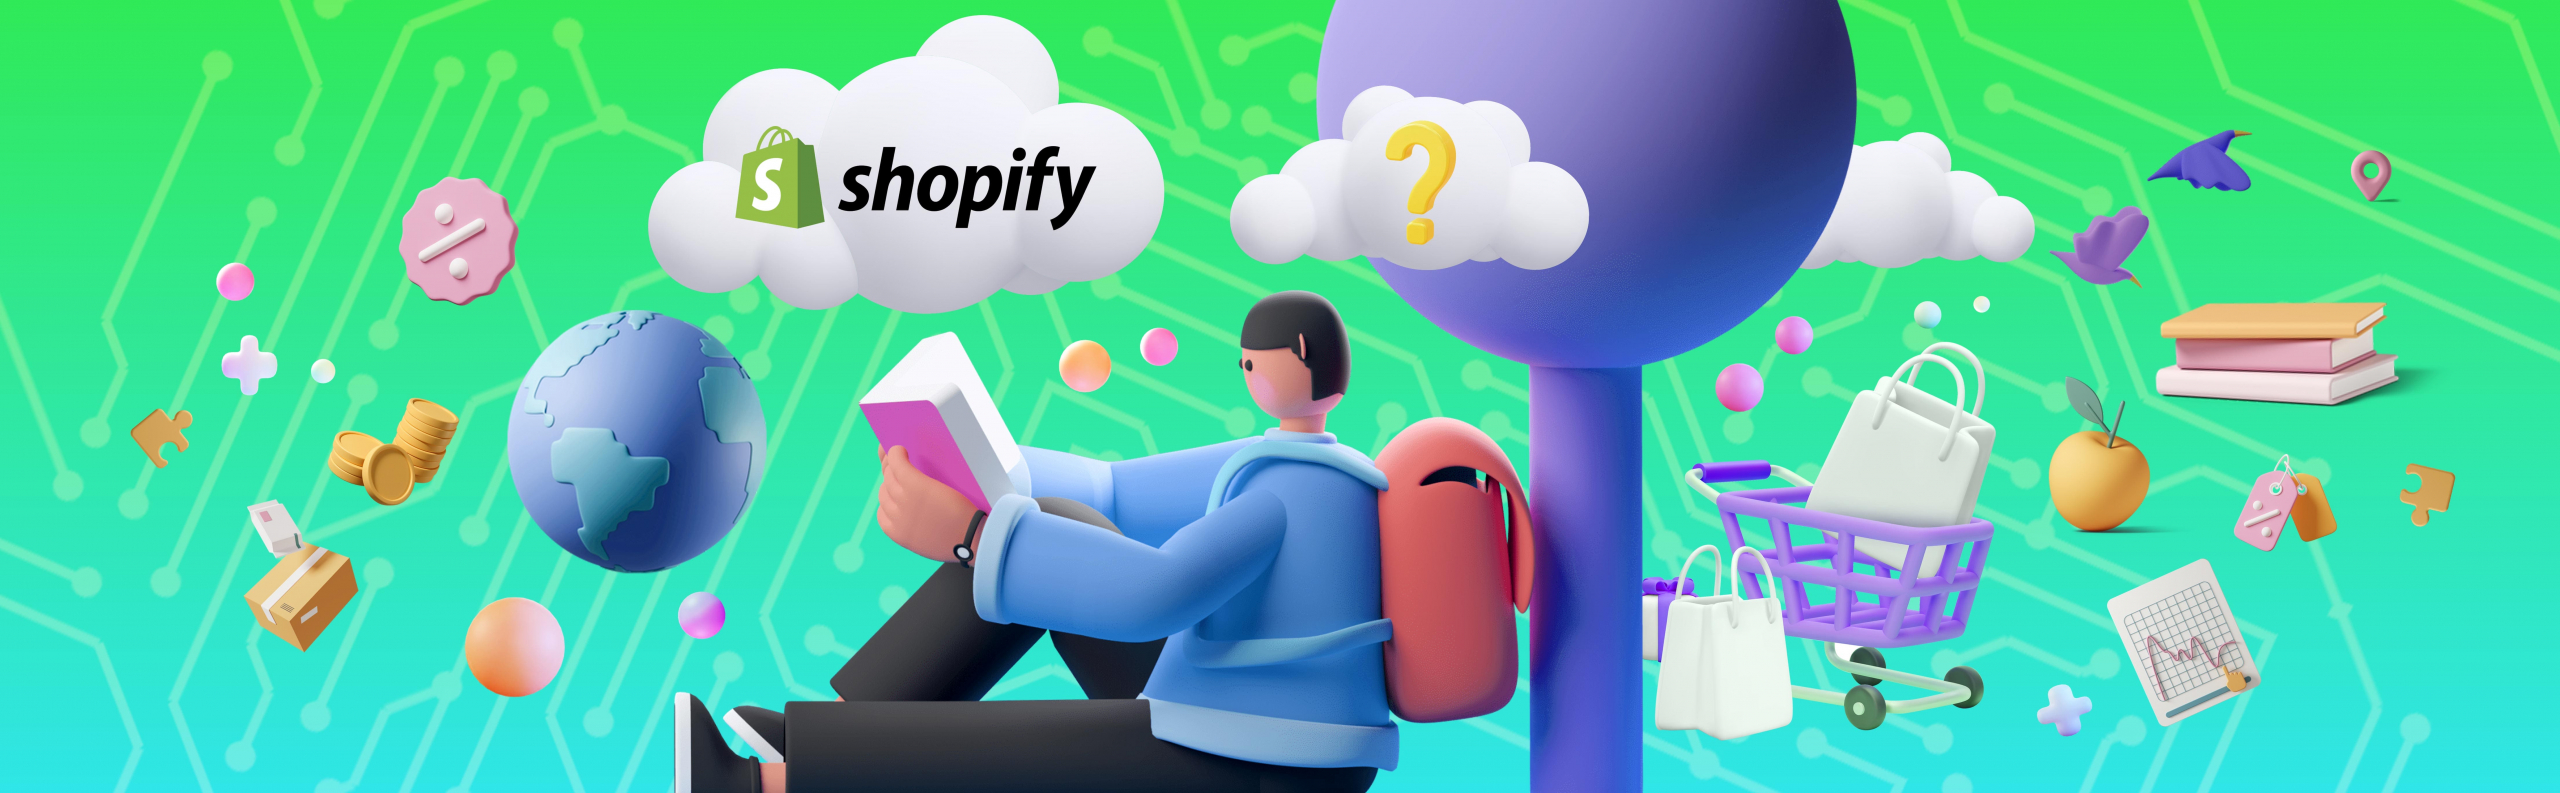 Shopify Tax Reporting